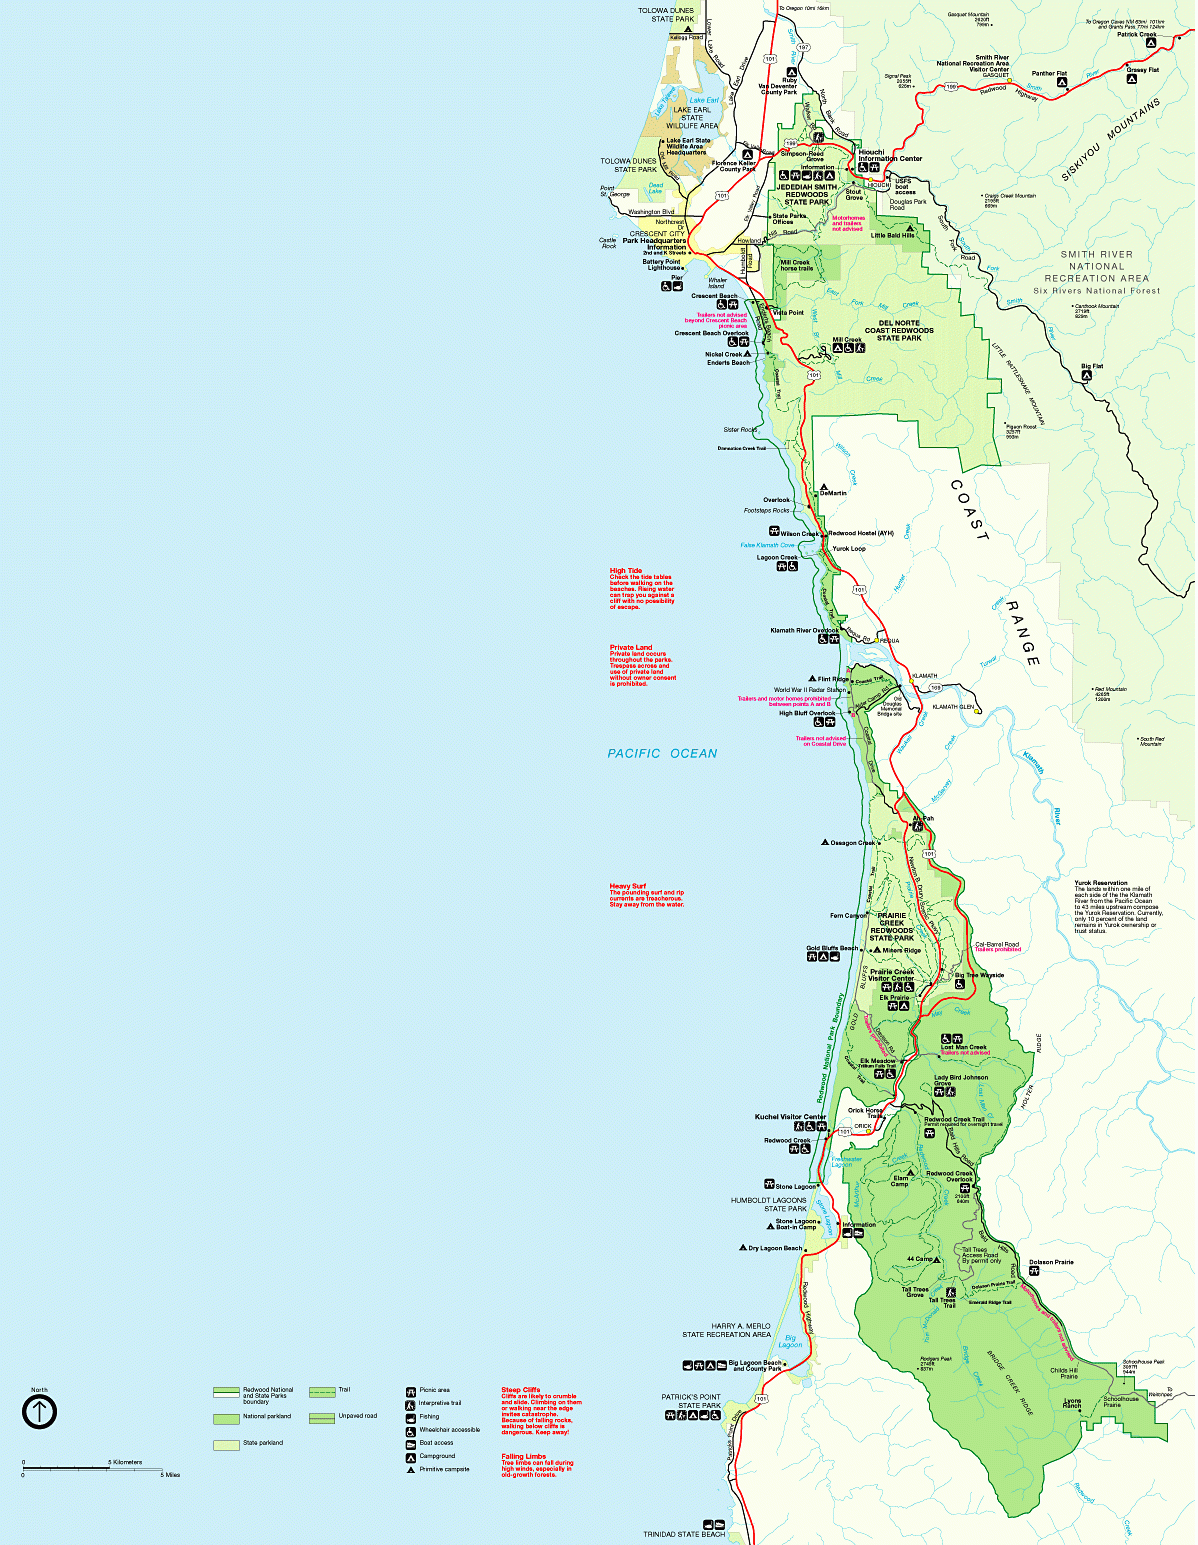 Redwood National Park Map, Redwood State Park California, Redwood Park - Where Is The Redwood Forest In California On A Map